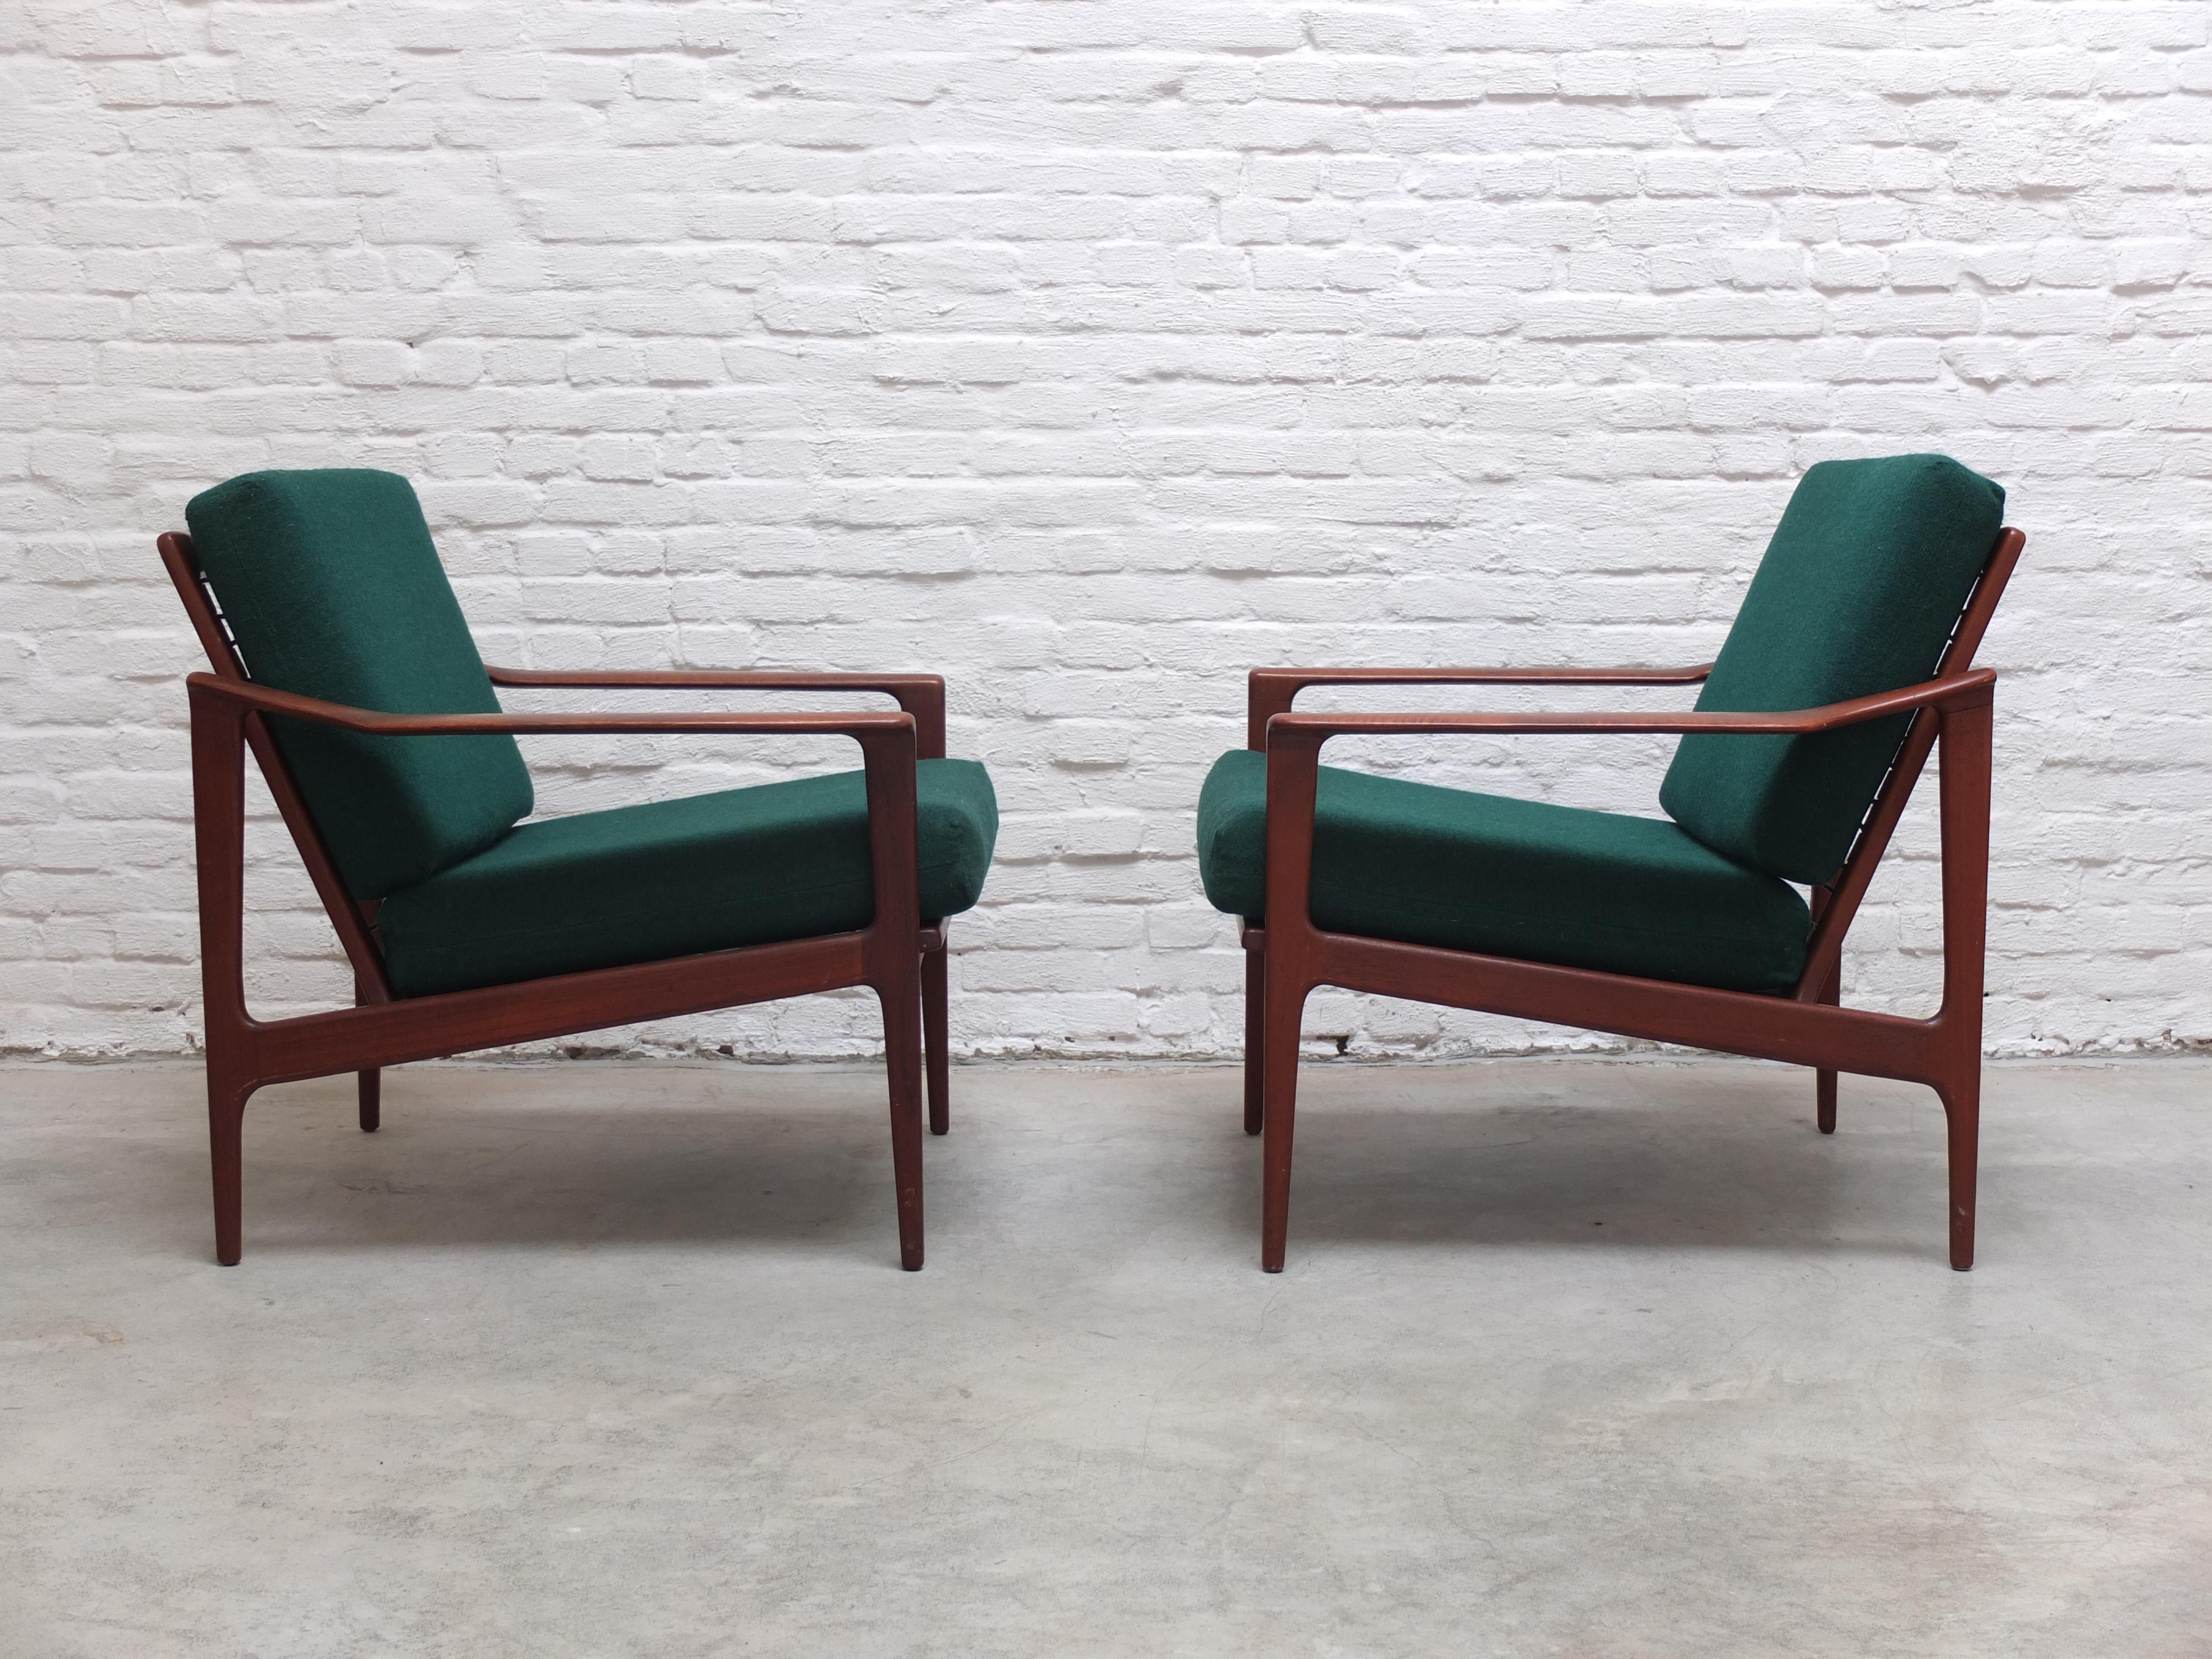 20th Century Danish Pair of Easy Chairs by Ib-Kofod Larsen for Selig, 1960s